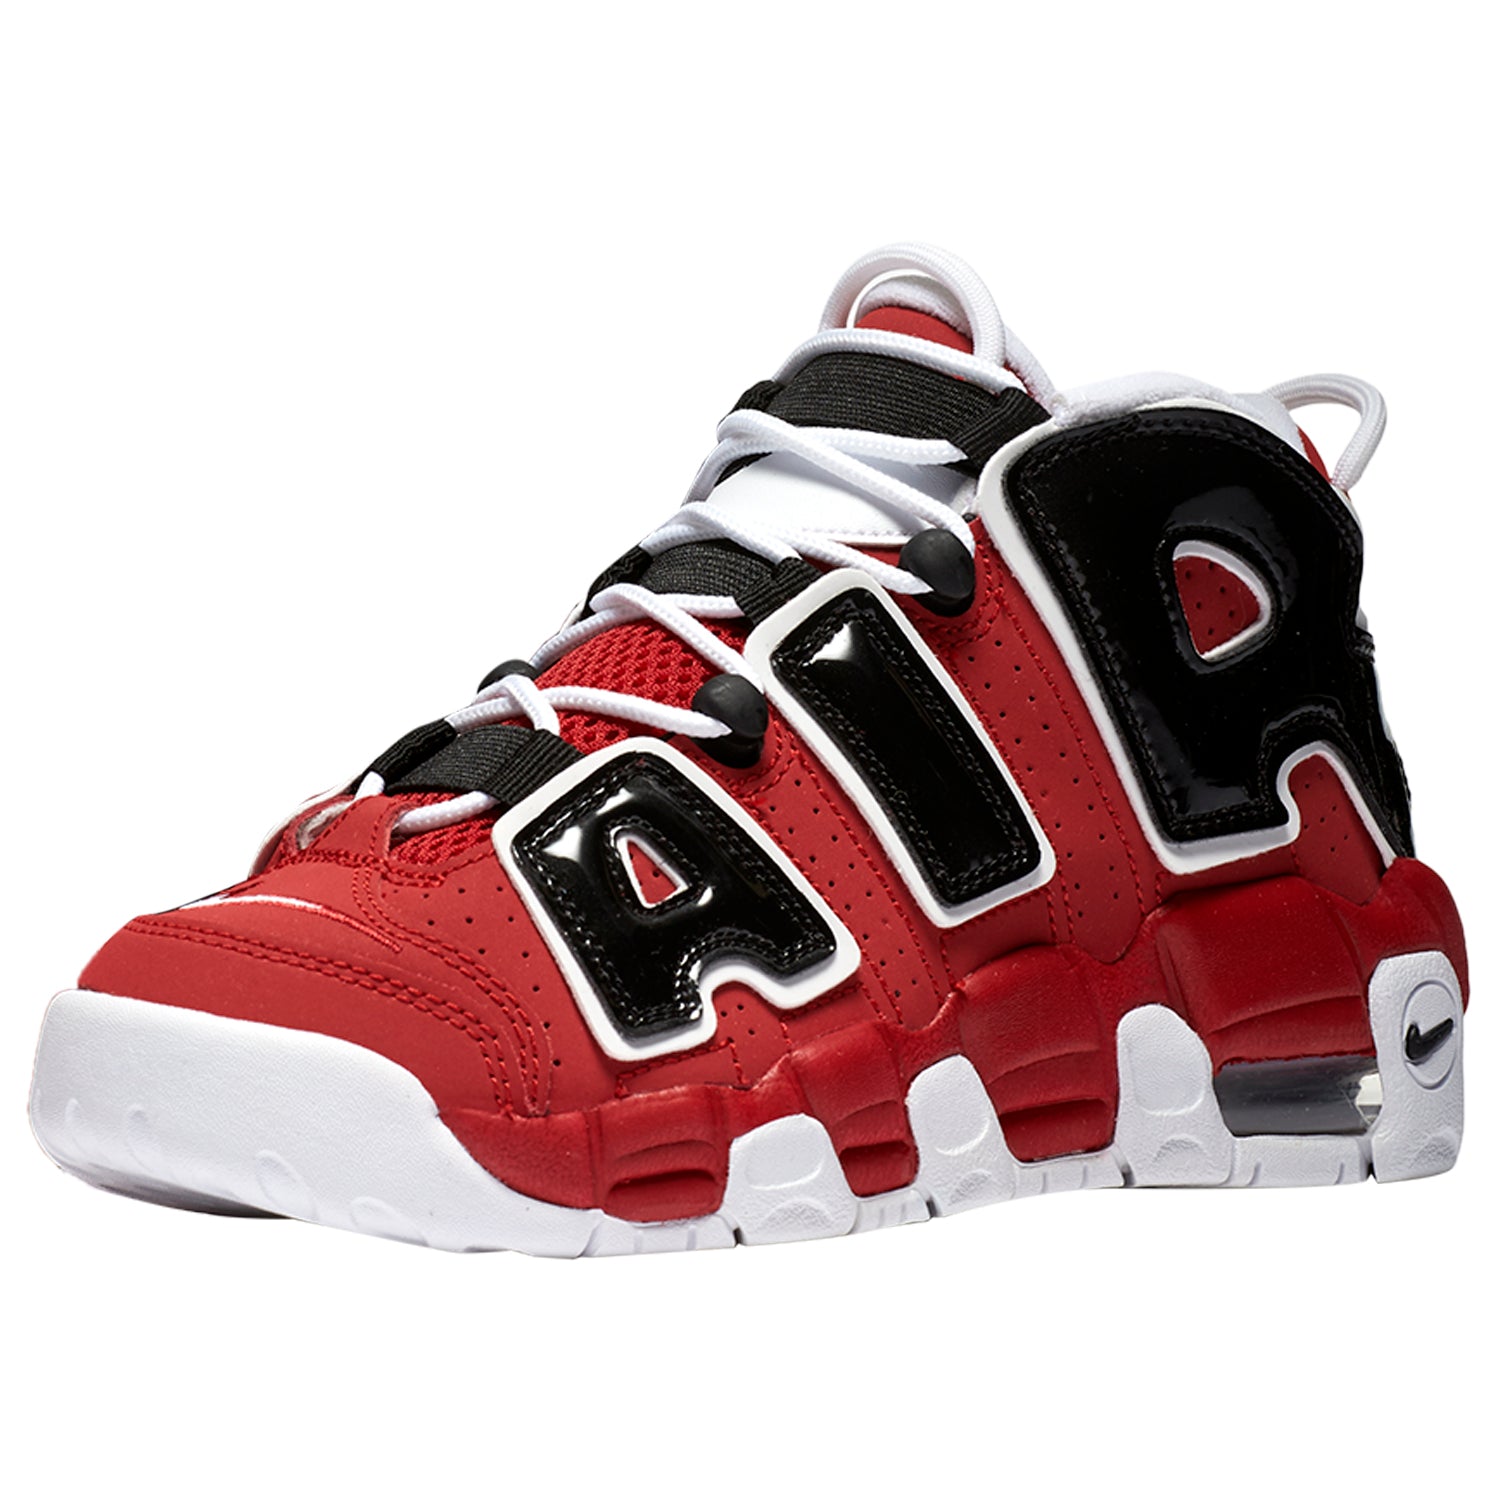 Nike Air More Uptempo Bulls Hoops Pack (GS)